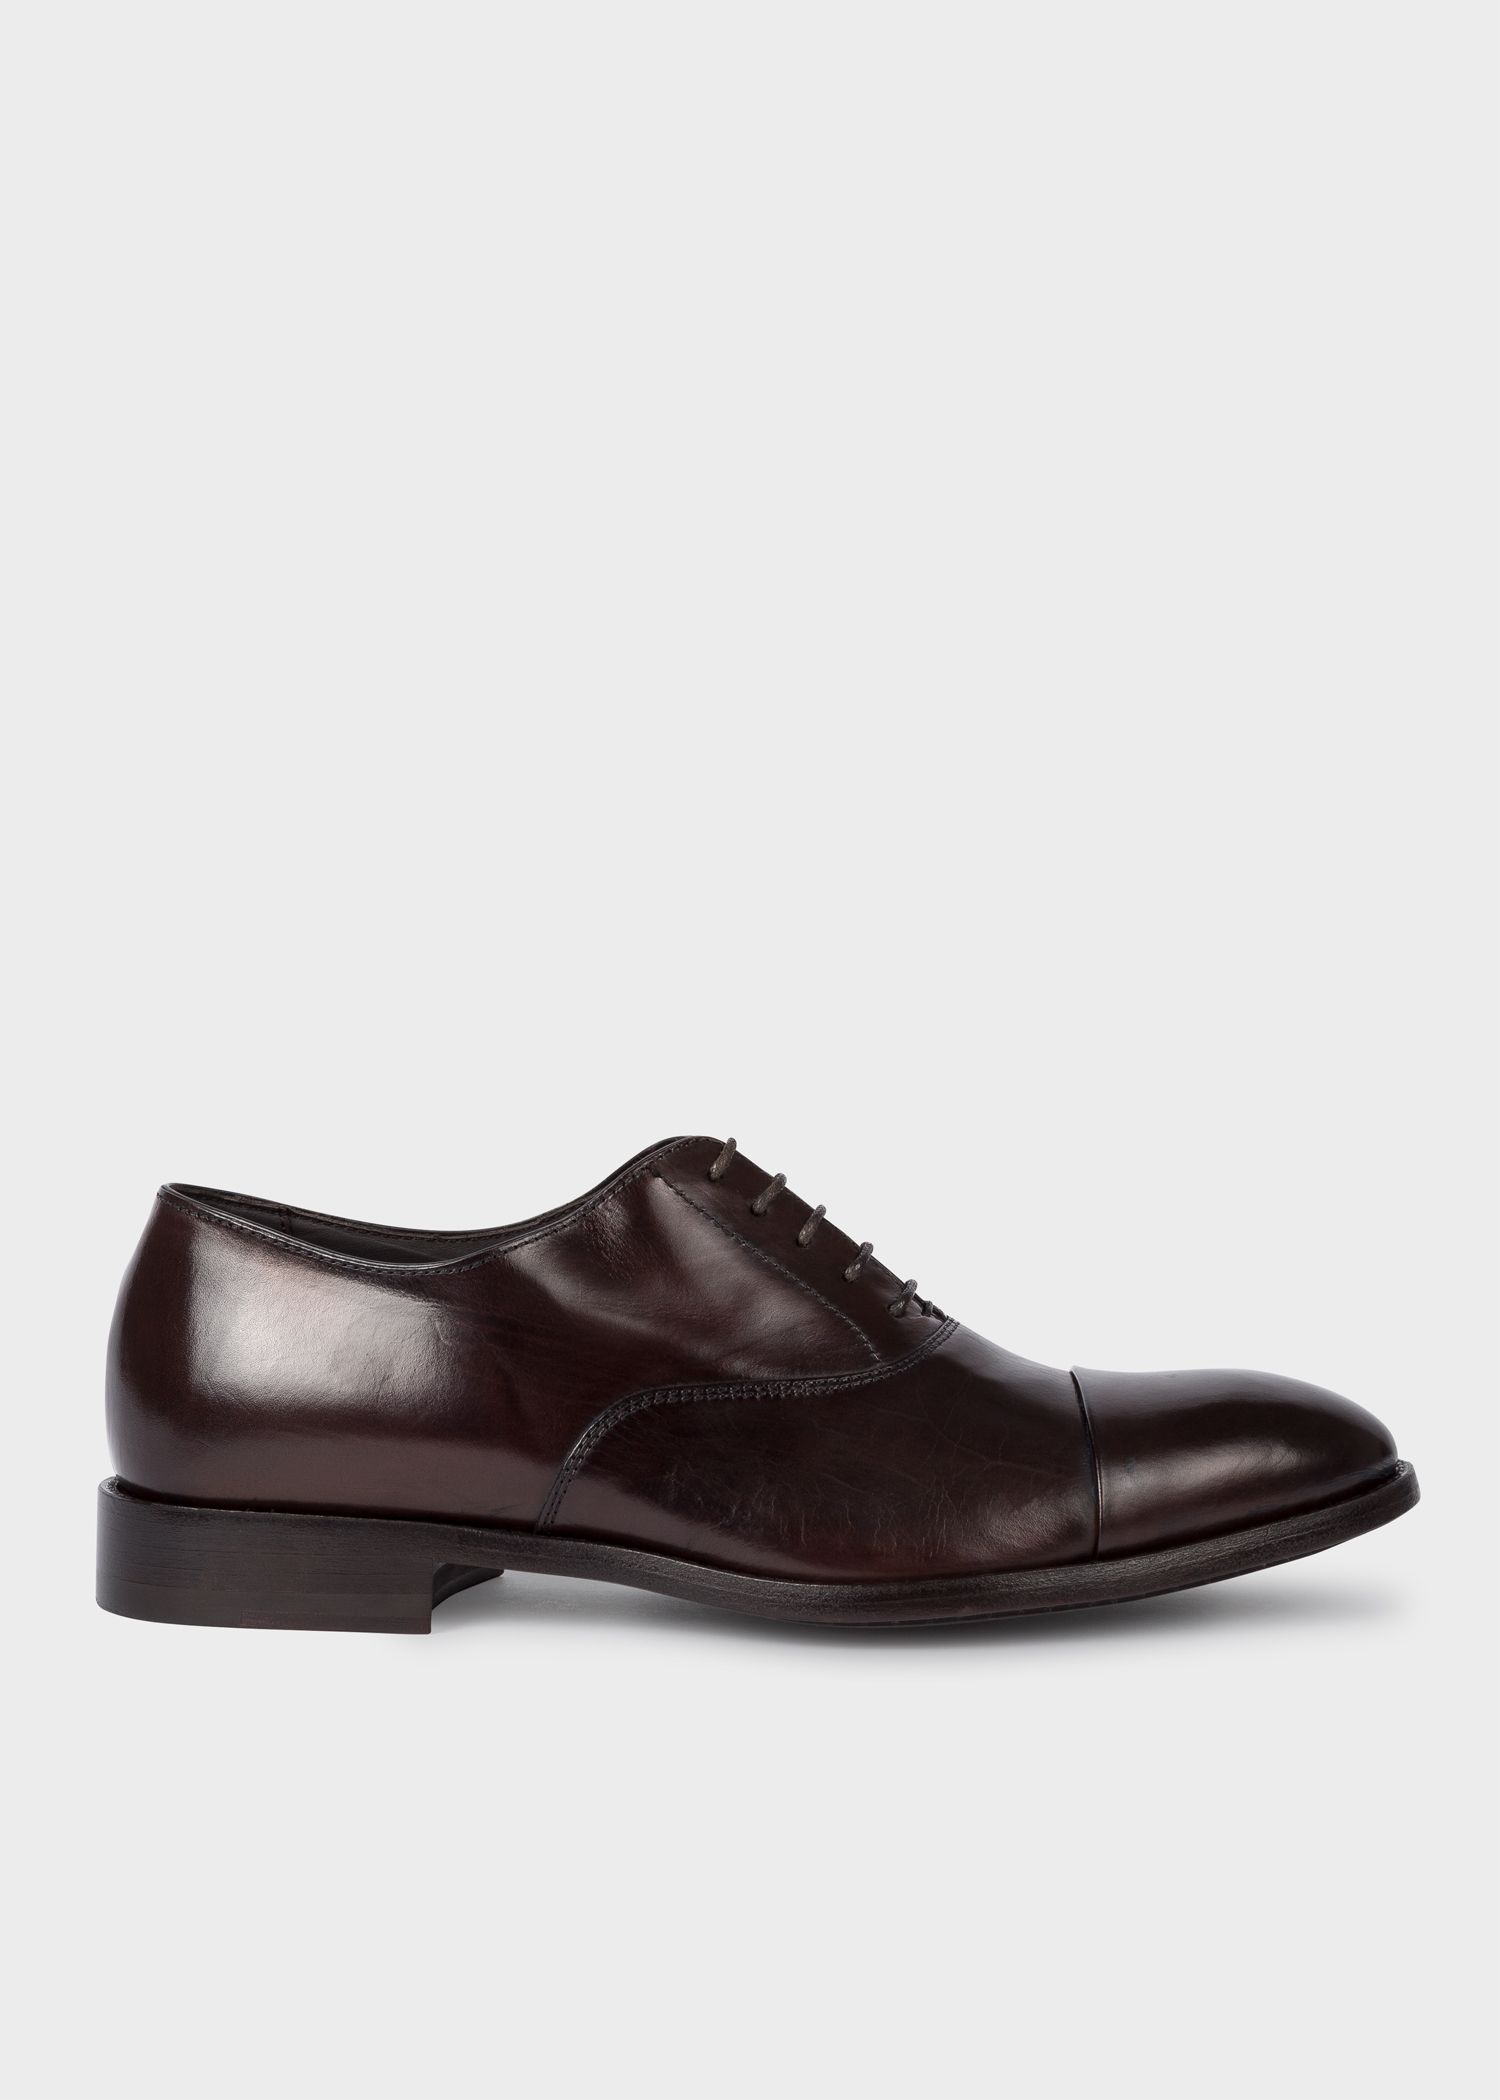 chocolate brown dress shoes